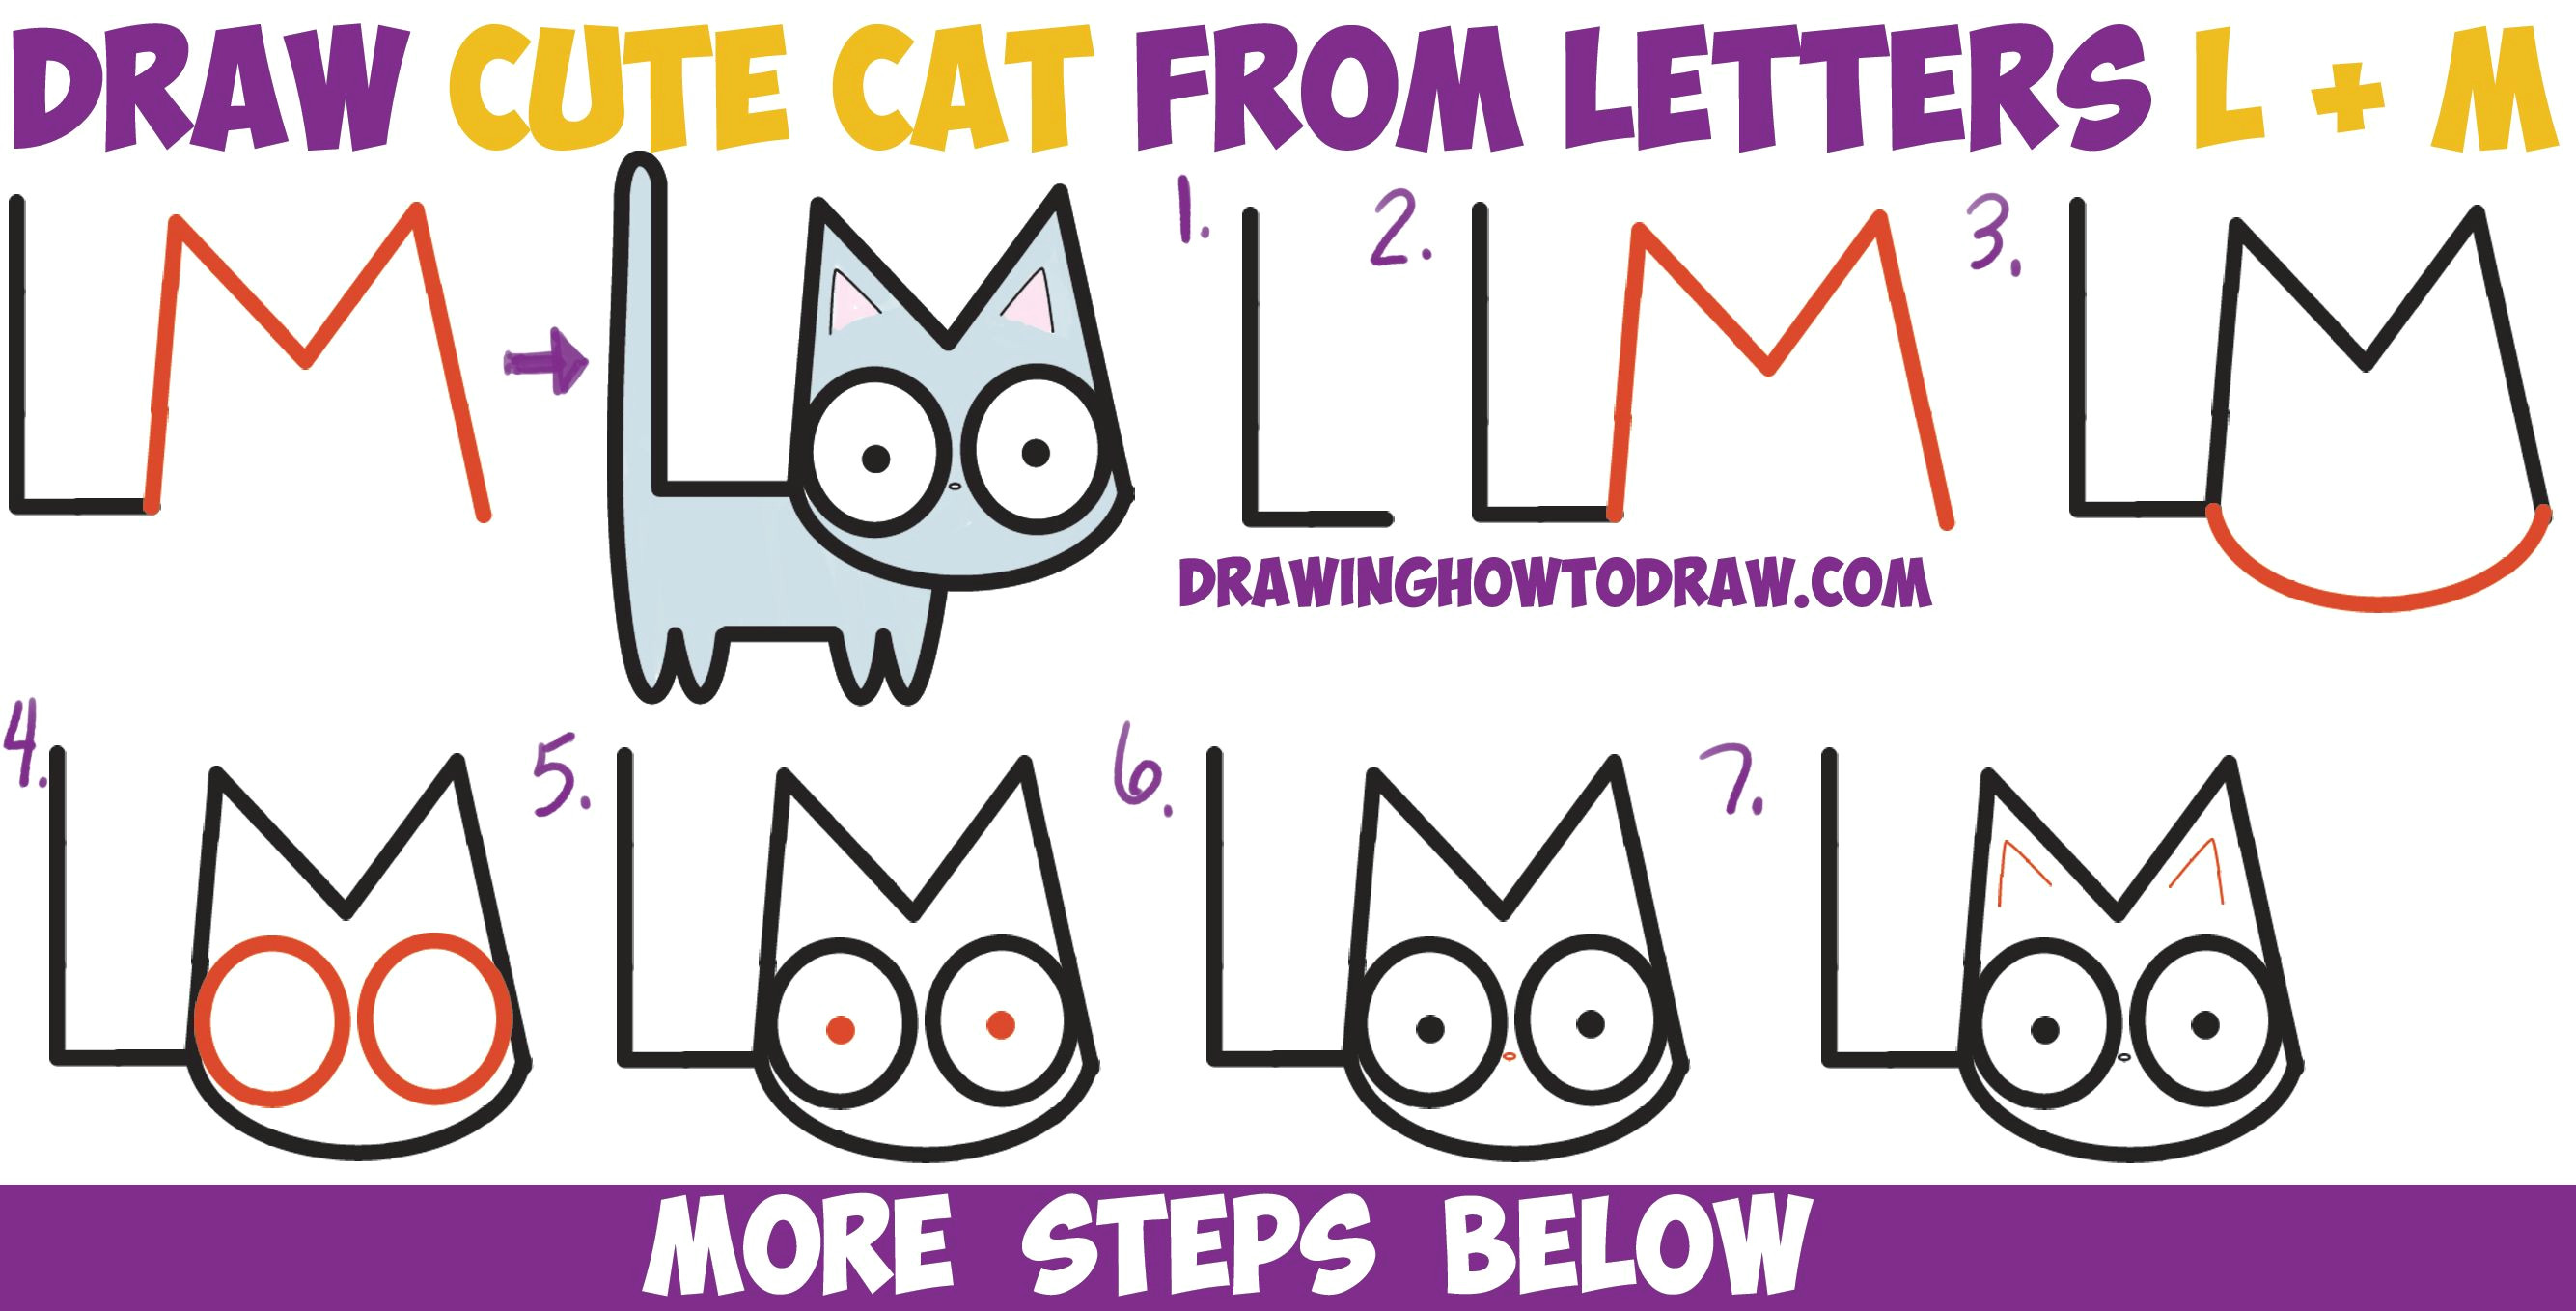 Drawing Cartoons From Letters How to Draw A Cute Cartoon Kitten From Letters L M Easy Step by